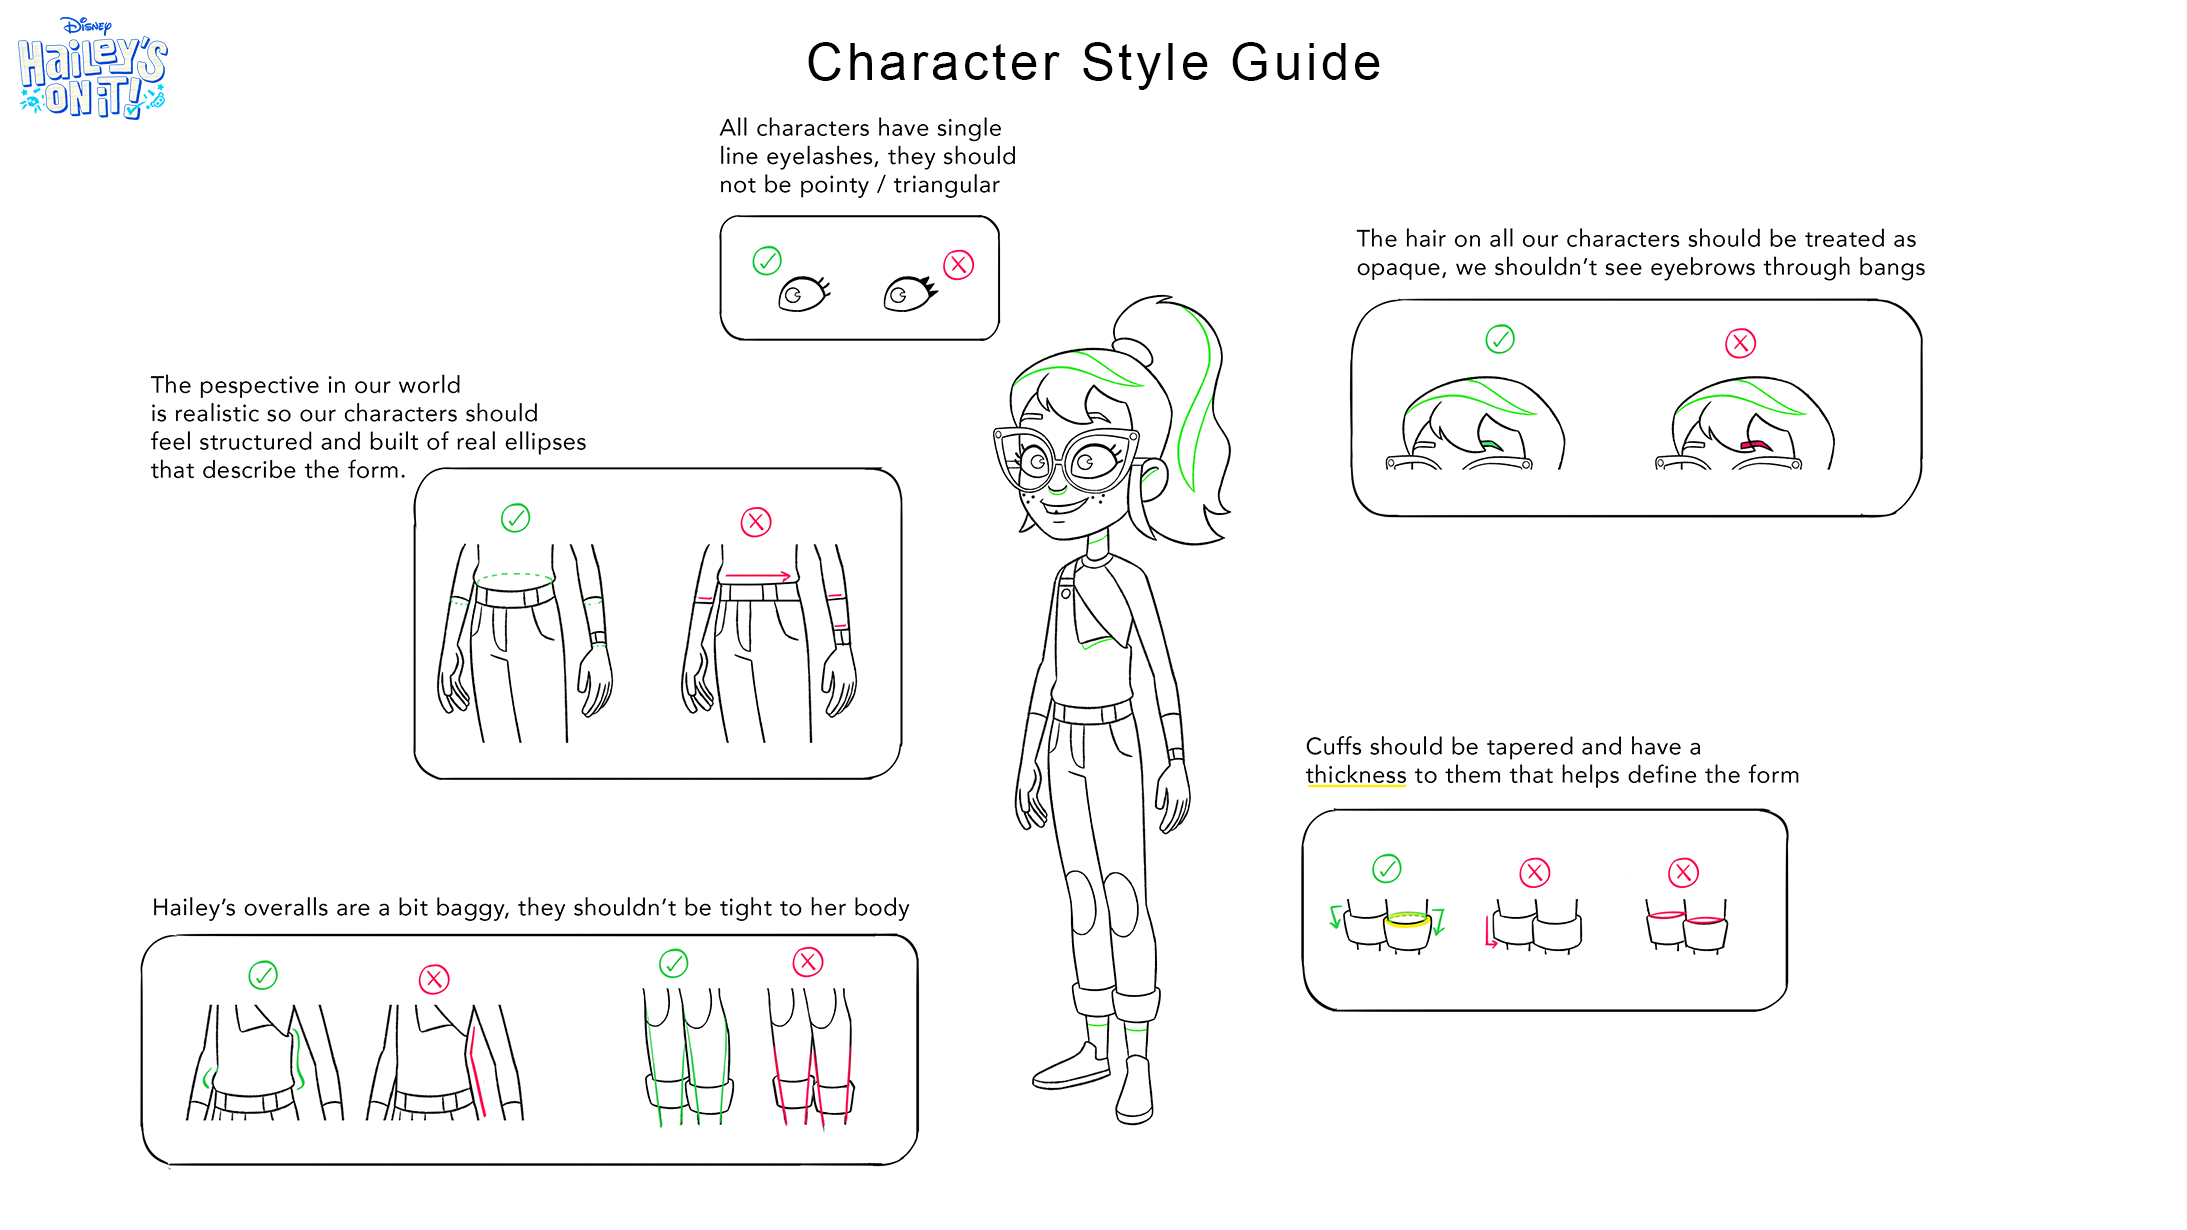 CHR Style Guide p1.png